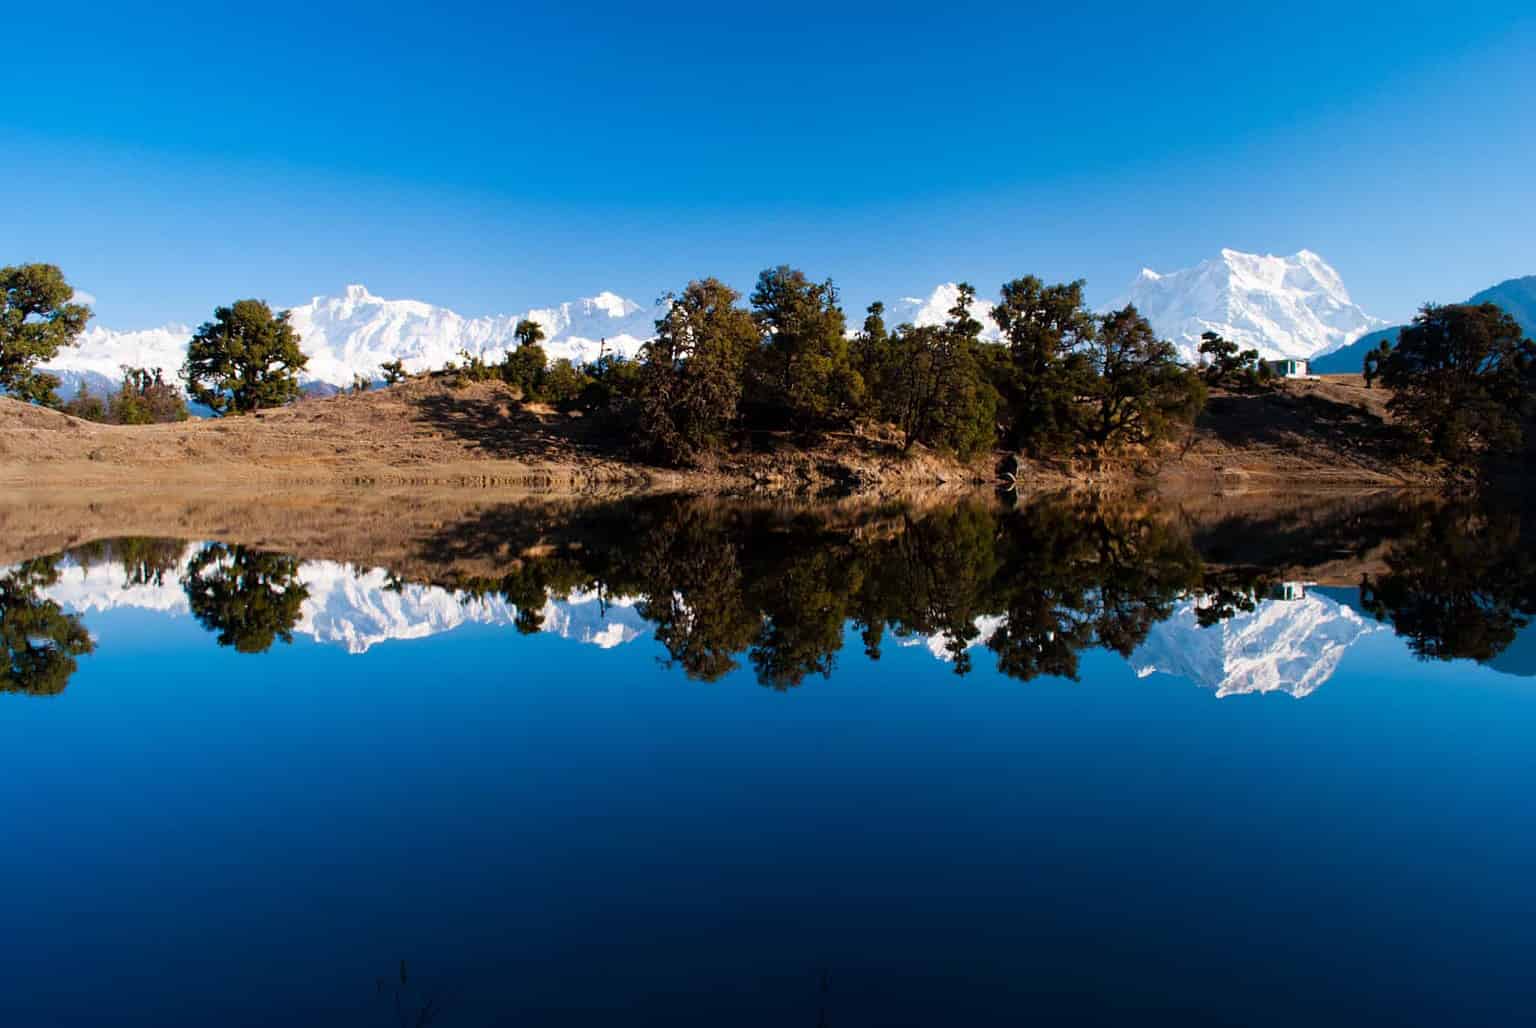 Reflections in Deoria Tal | Revisiting Uttarakhand